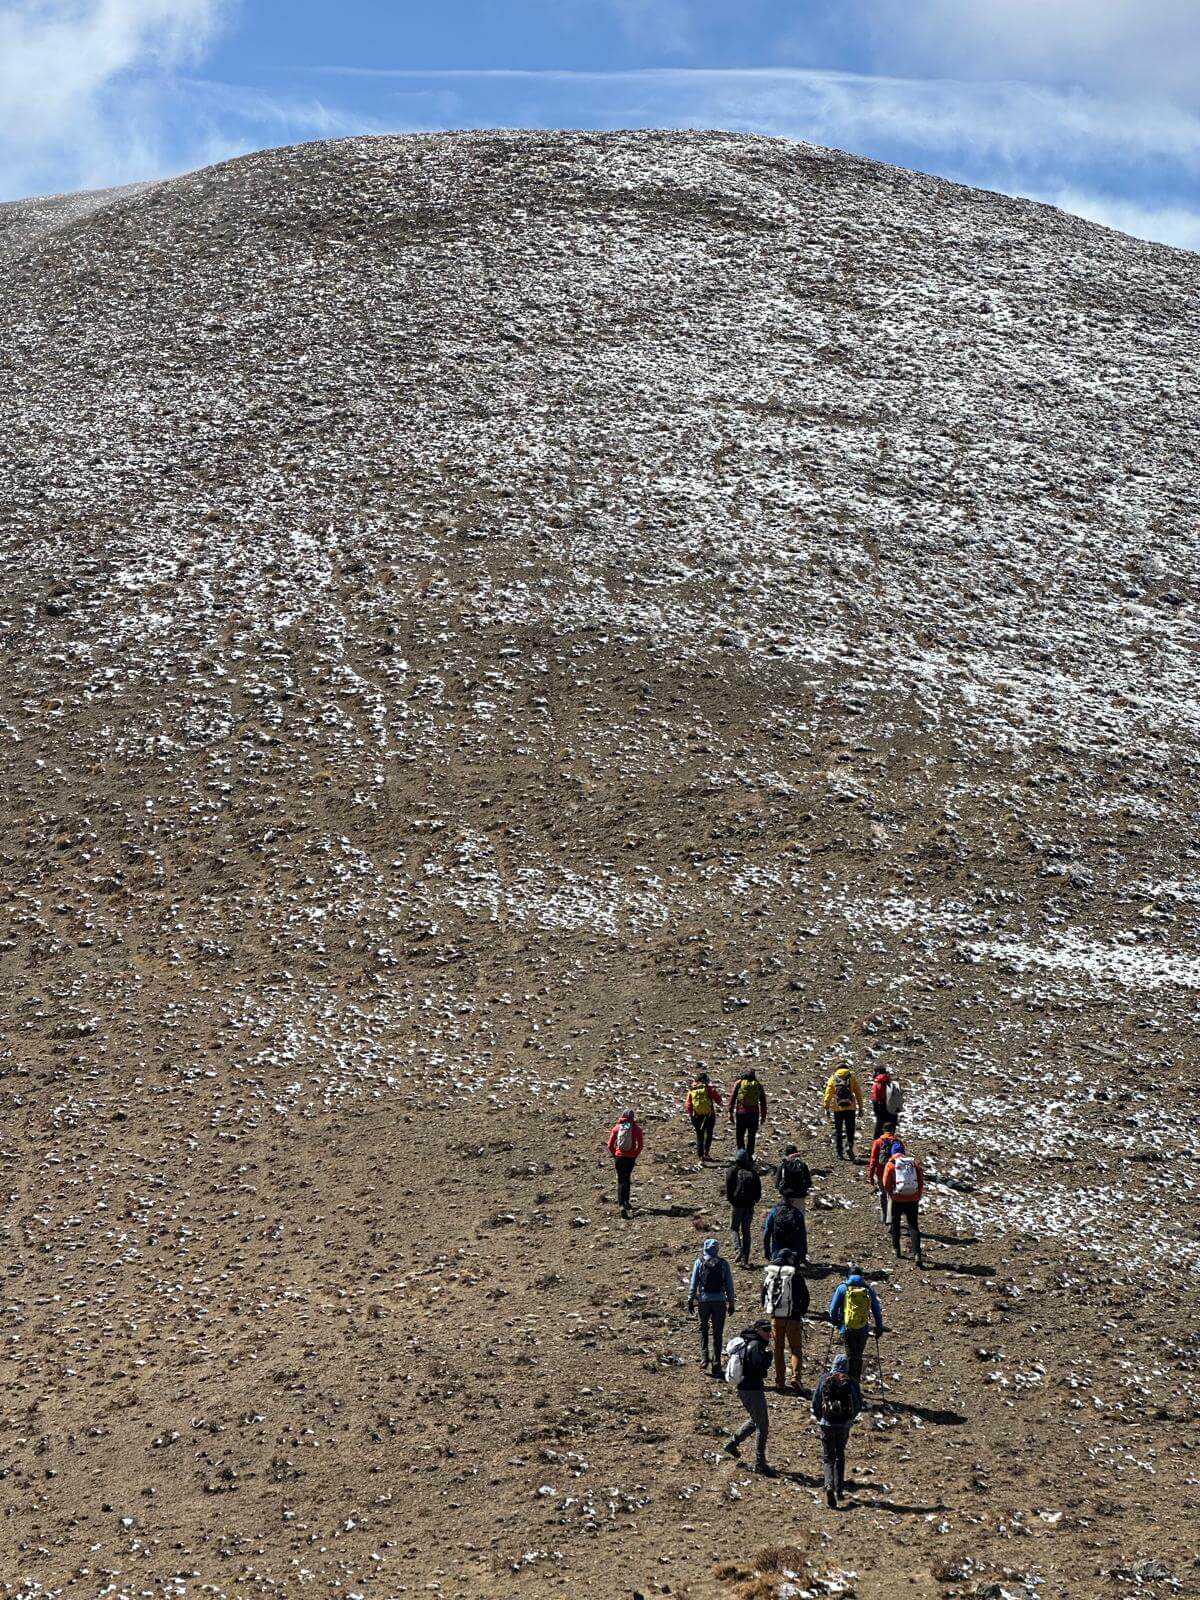 A group of climbers ascend a large, rocky hill that has a little snow on it while acclimatizing in Tingri, Tibet.